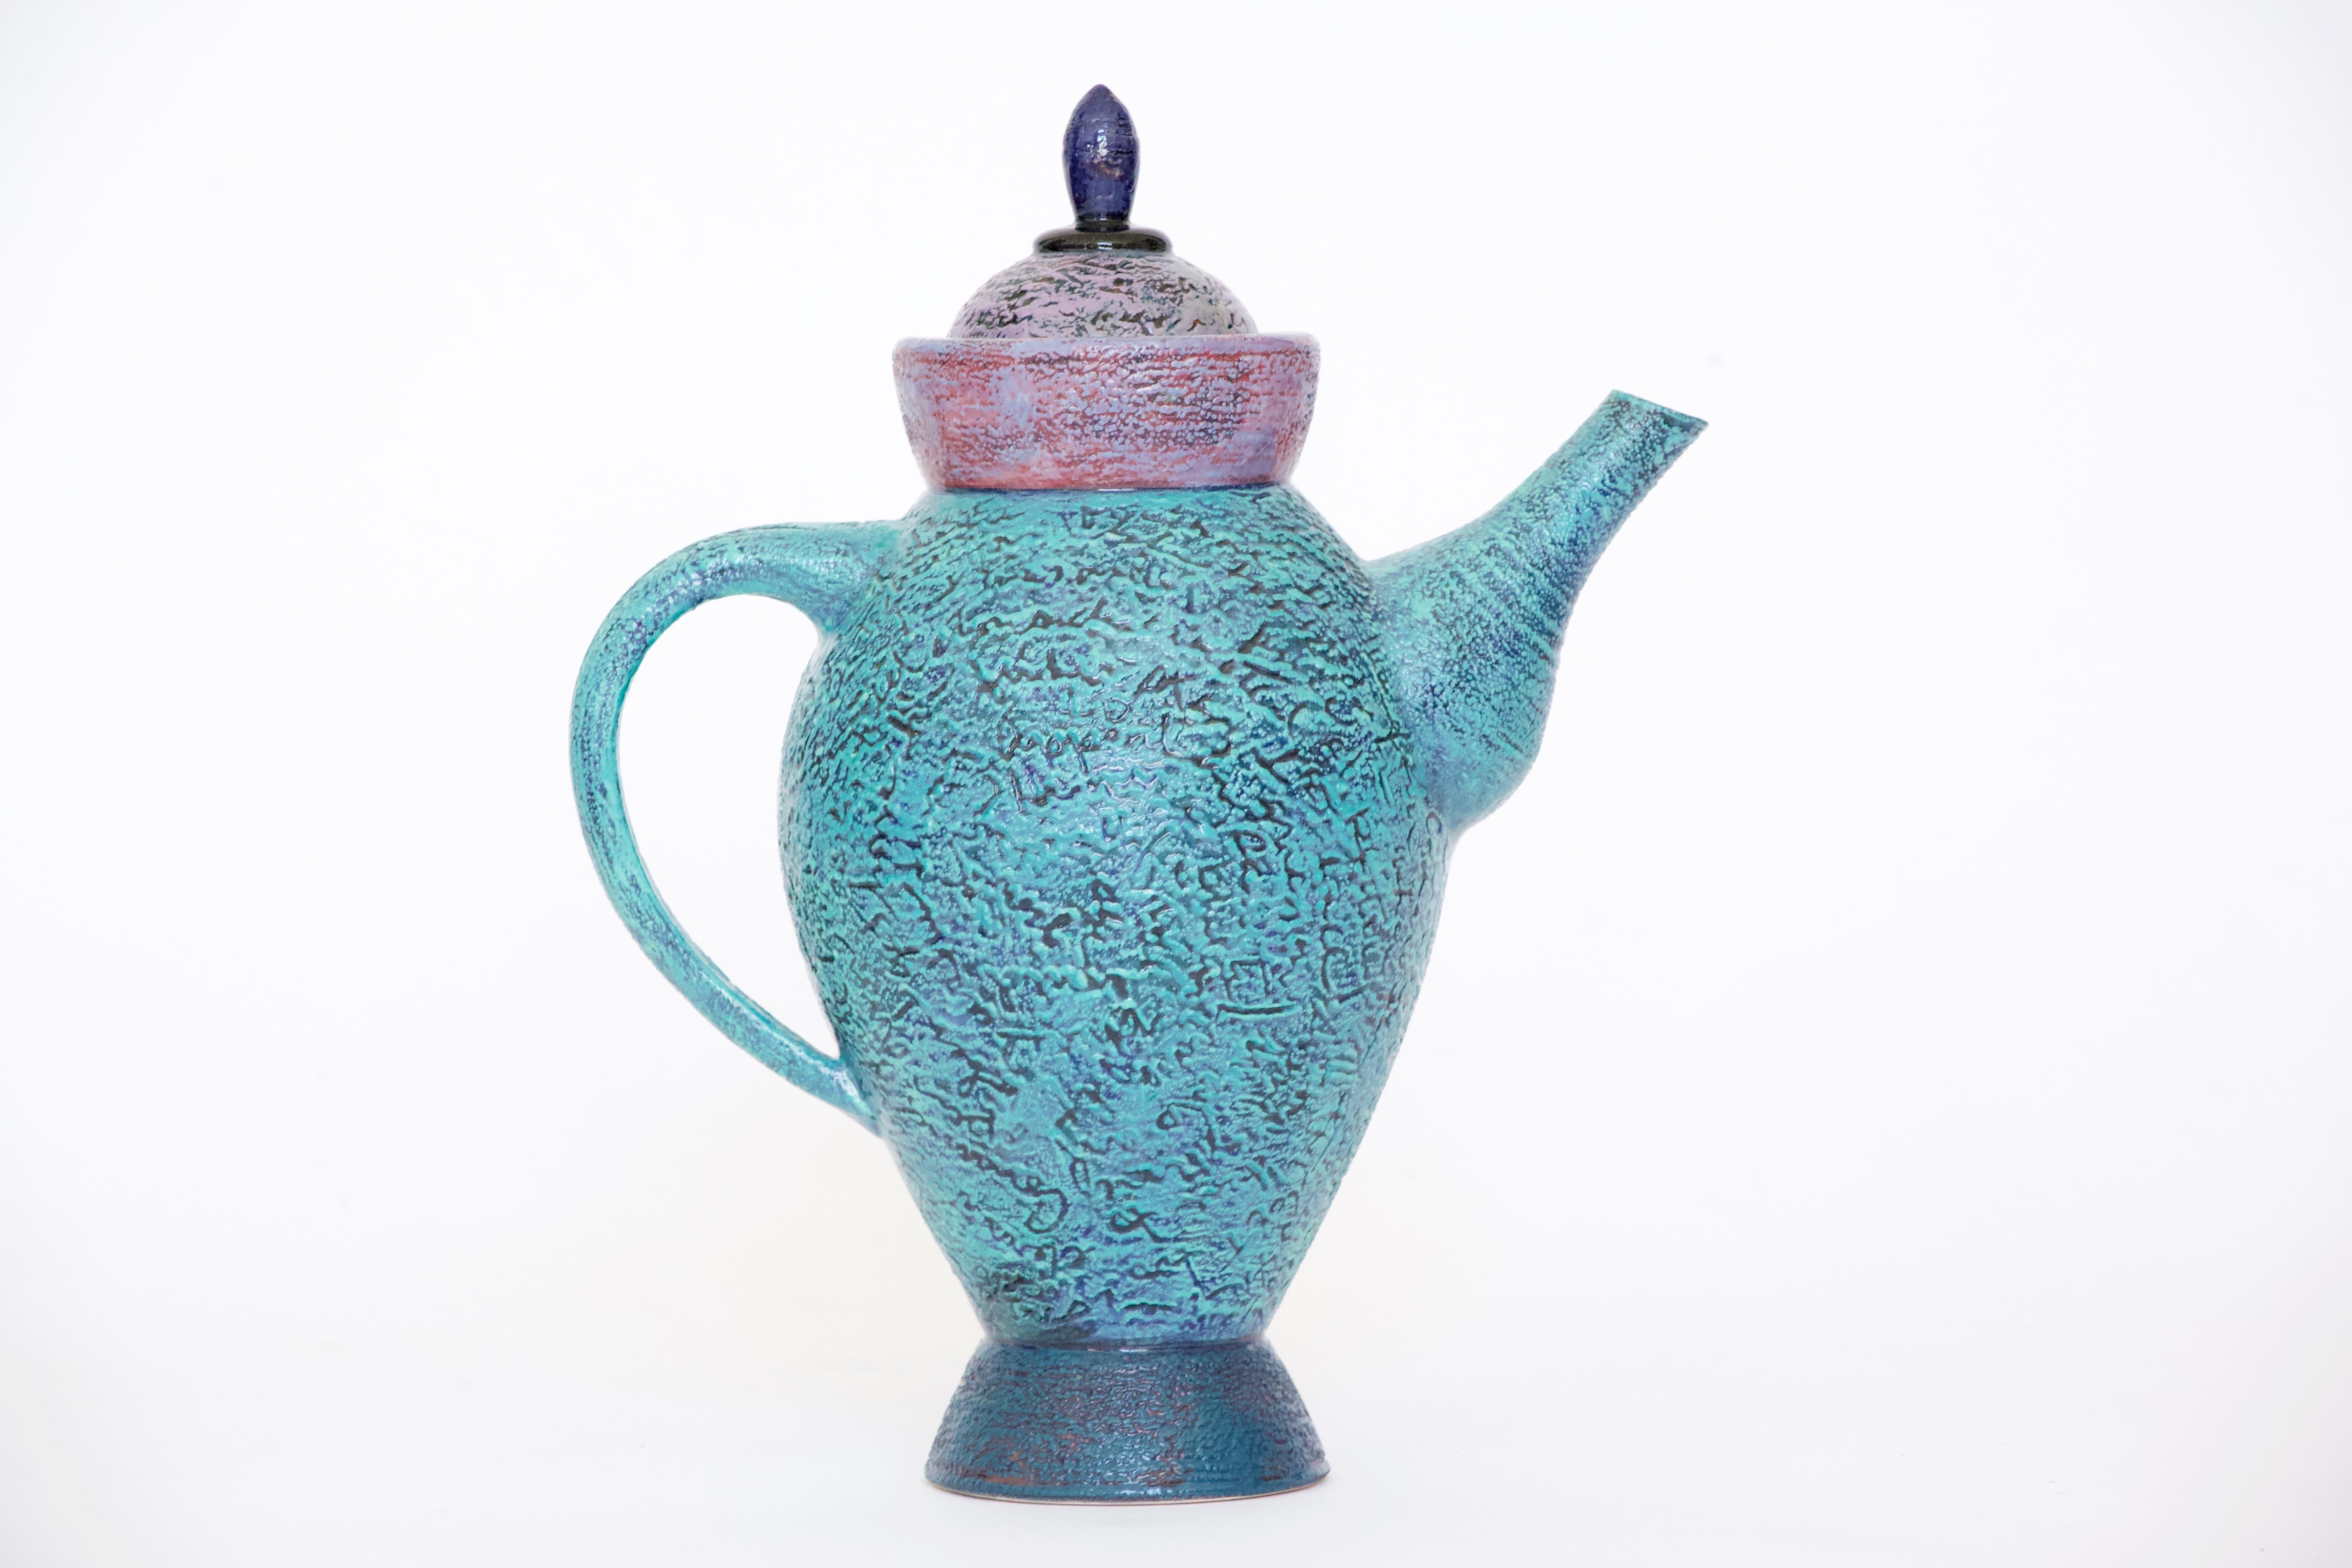 A wonderful signed and numbered decorative ceramic teapot by artist Michel Conroy. Conroy's artworks are included in the collections of the San Angelo (TX) Museum of Fine Arts, the University of Georgia, Athens, Yeoju Institute of Technology, Yeoju,